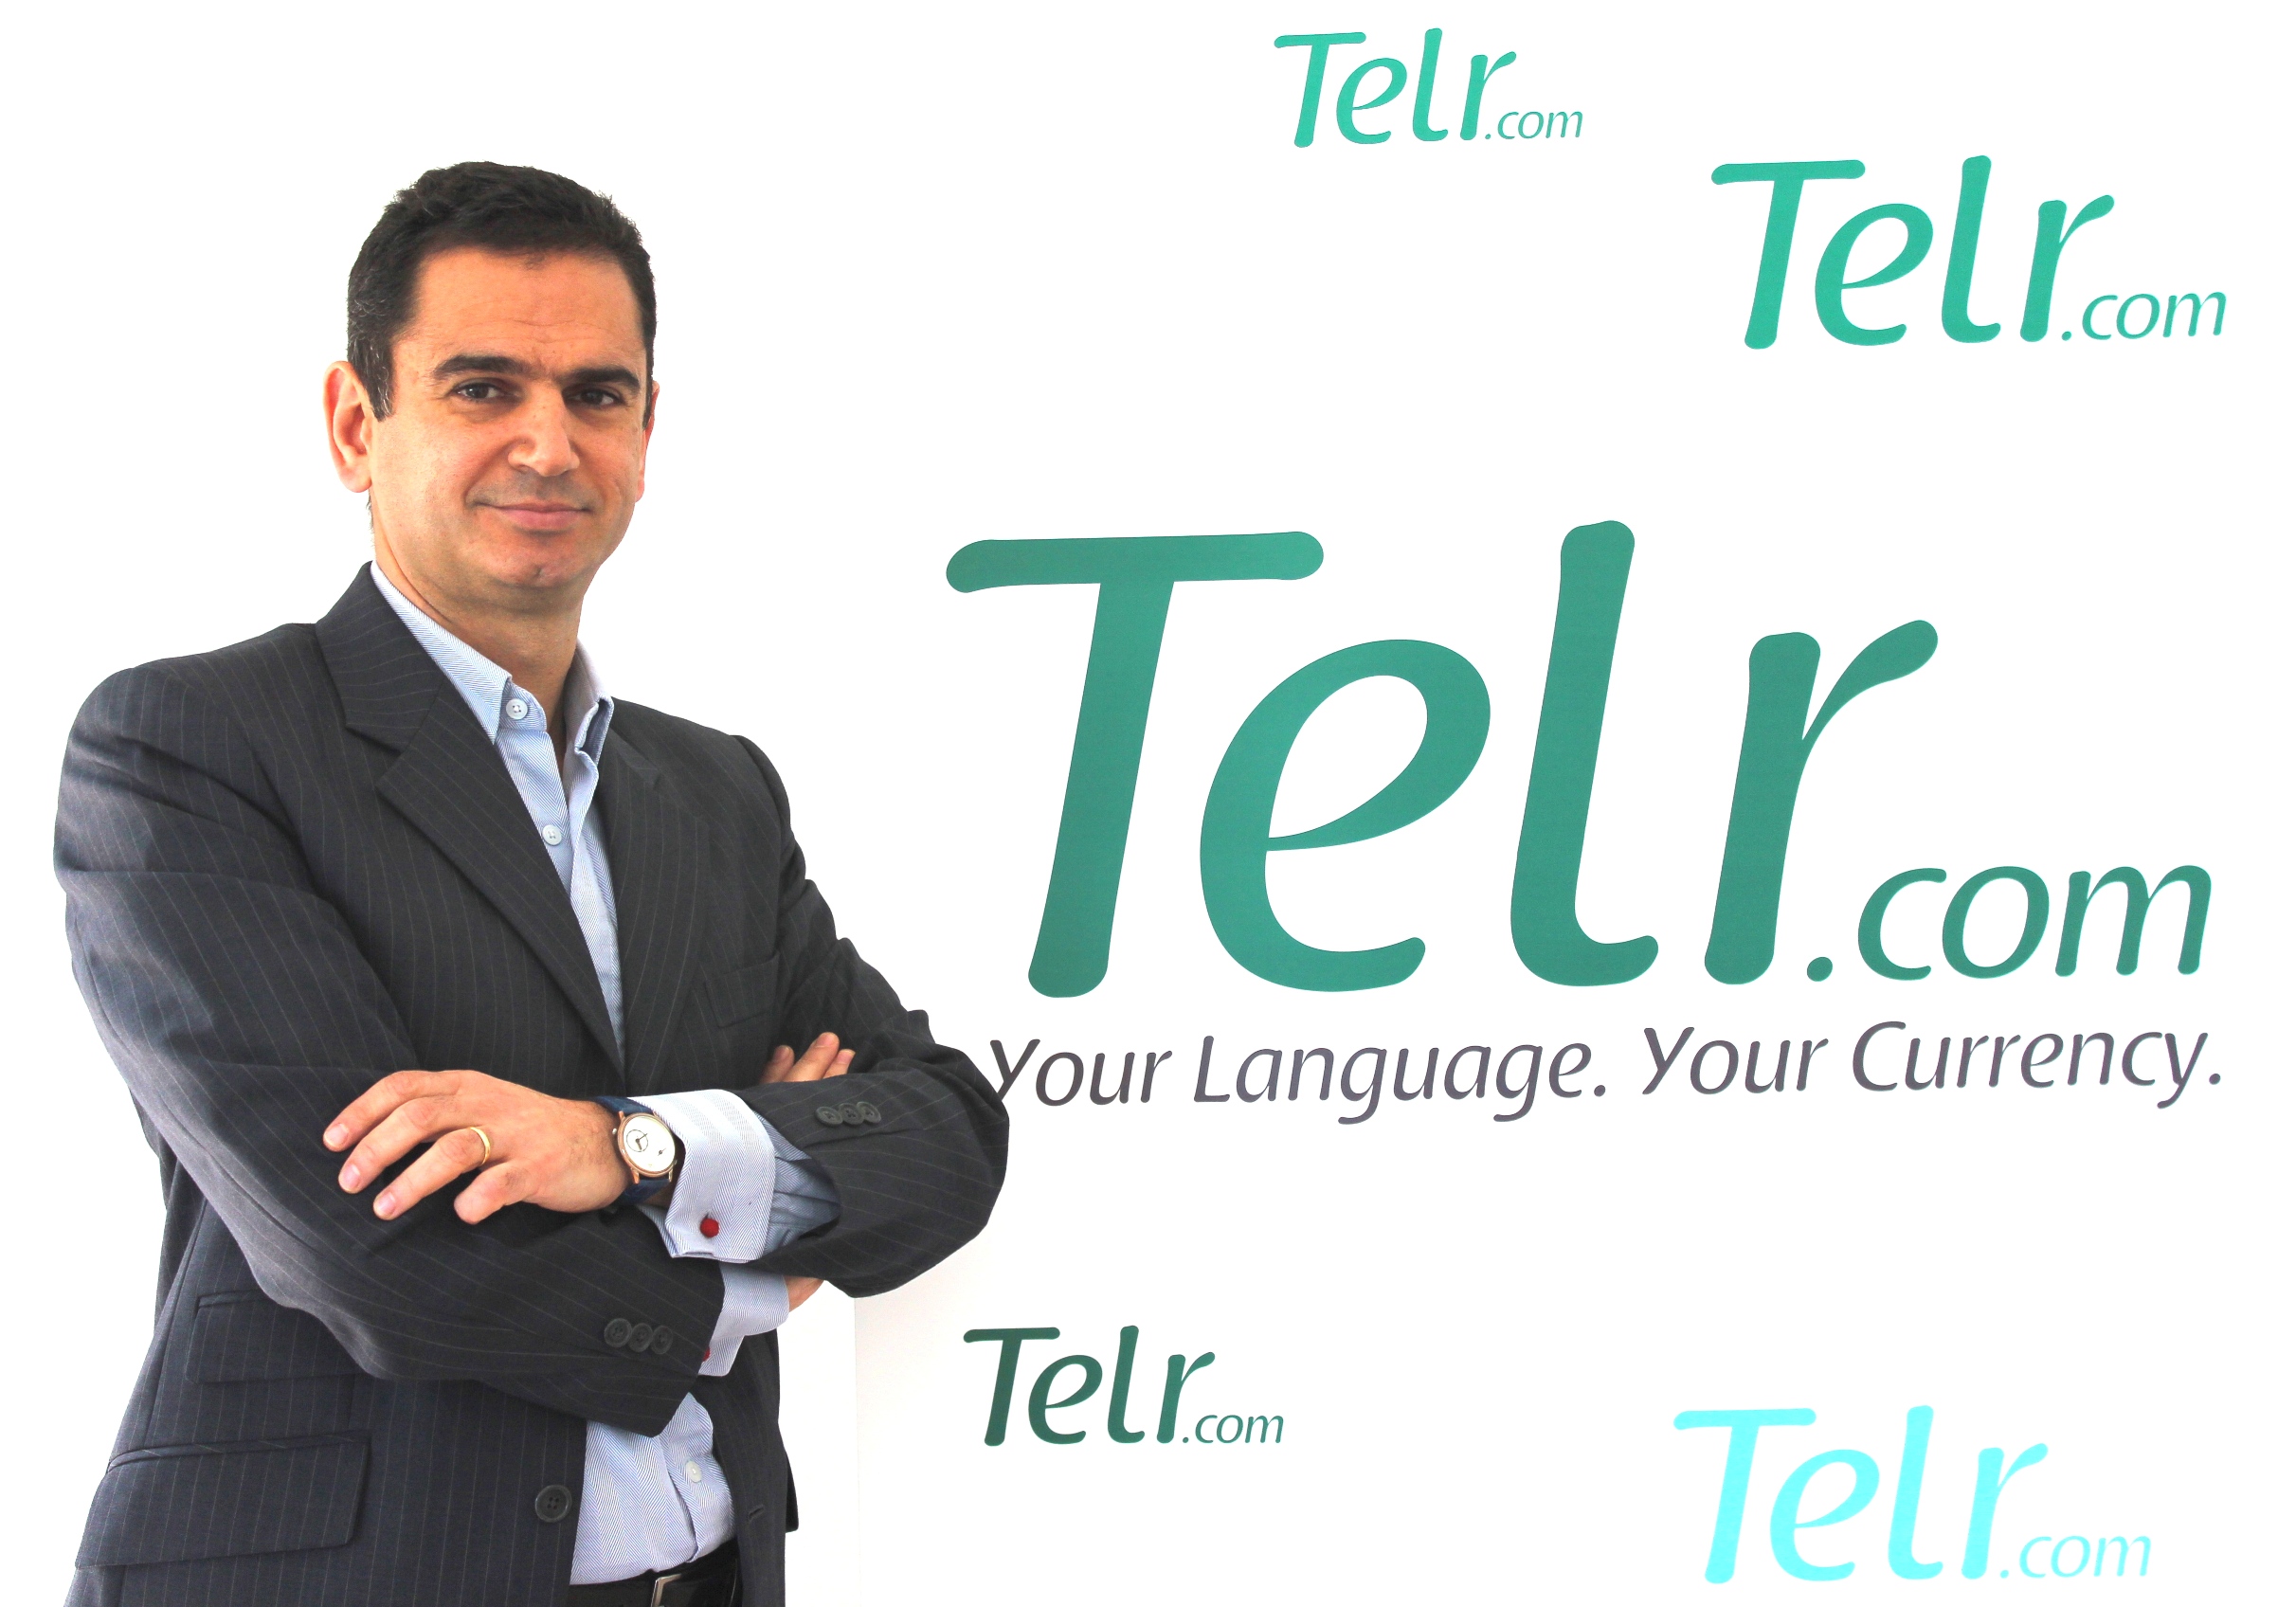 Online payment platform Telr secures investment in growth funding